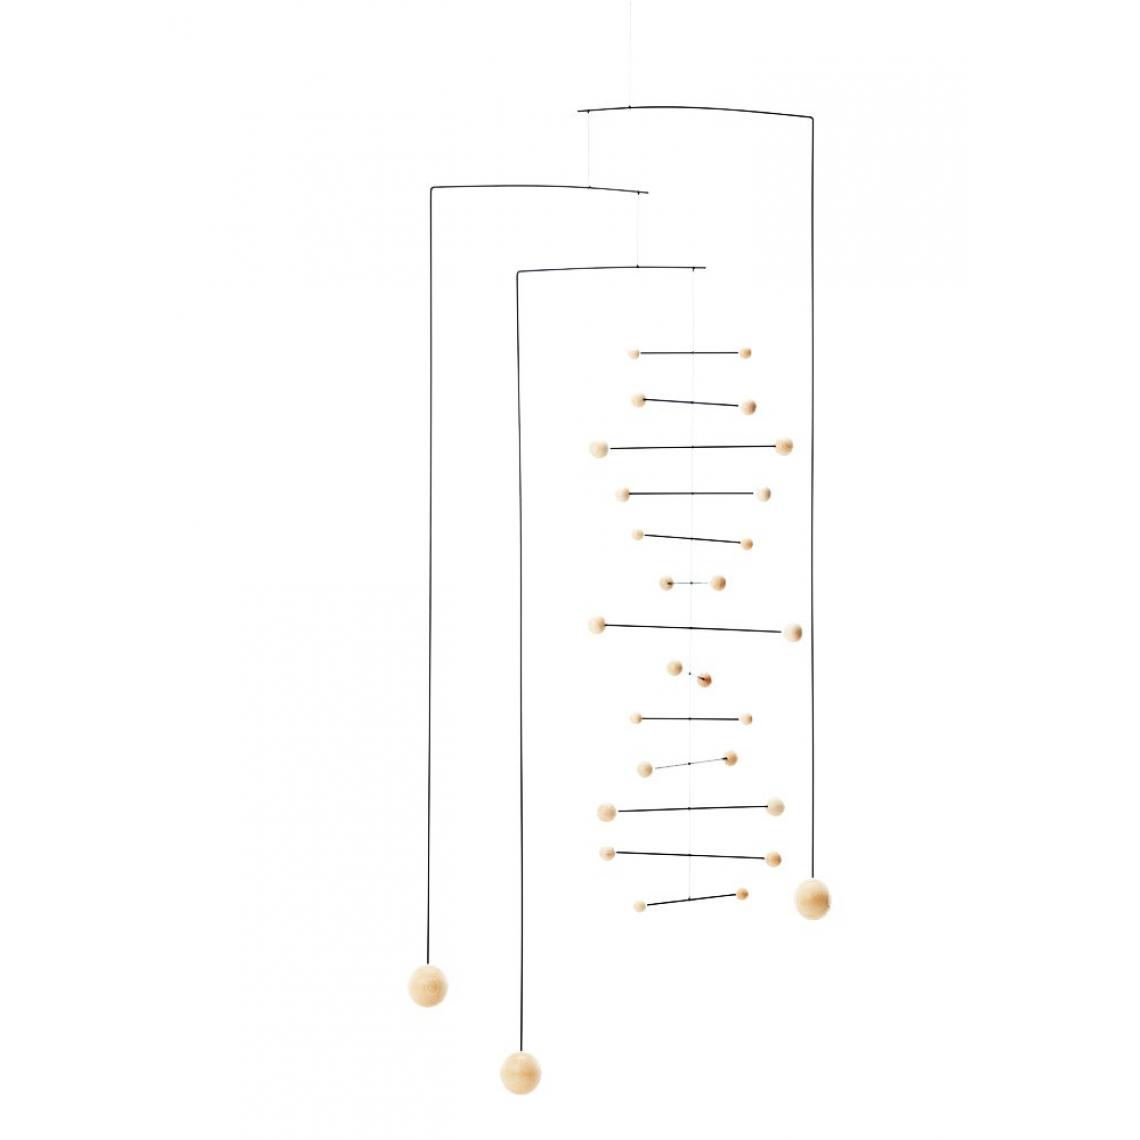 Flensted - Flensted Mobiles Counterpoint maxi nature - Objets déco